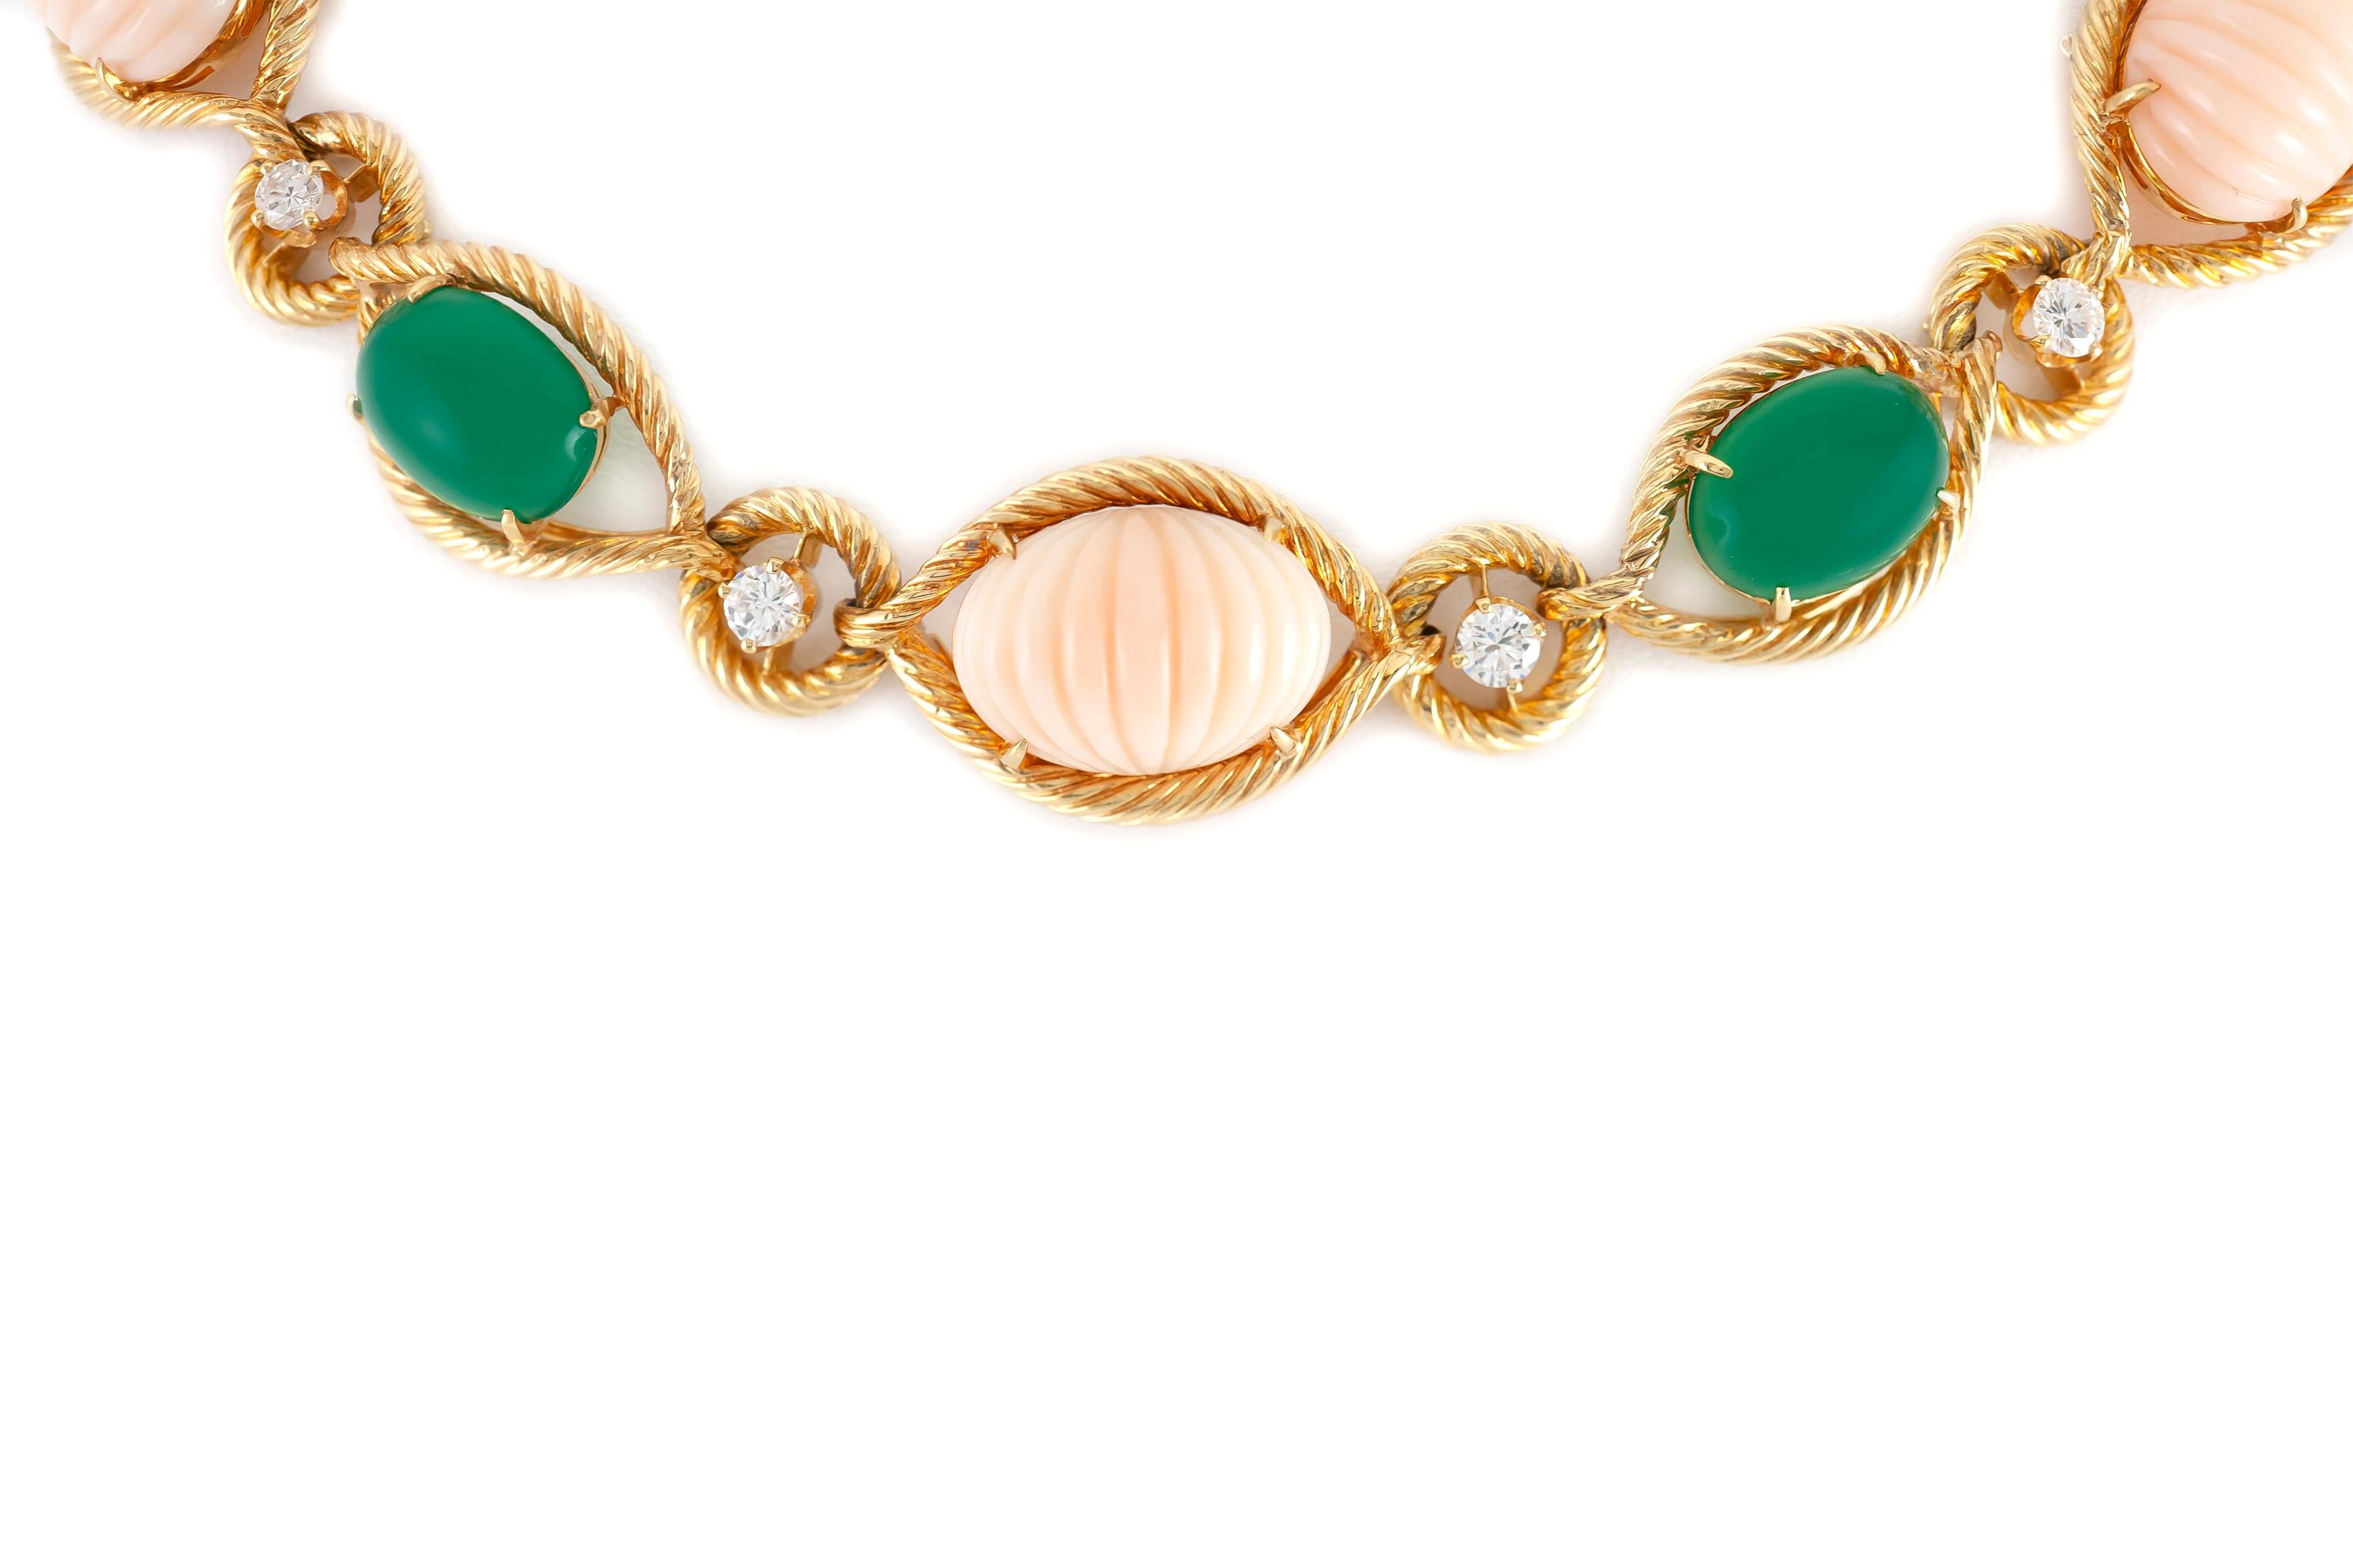 The set is finely crafted in 18 yellow gold with 4.00 carat of diamonds and beautiful coral adding and chrysoprase.